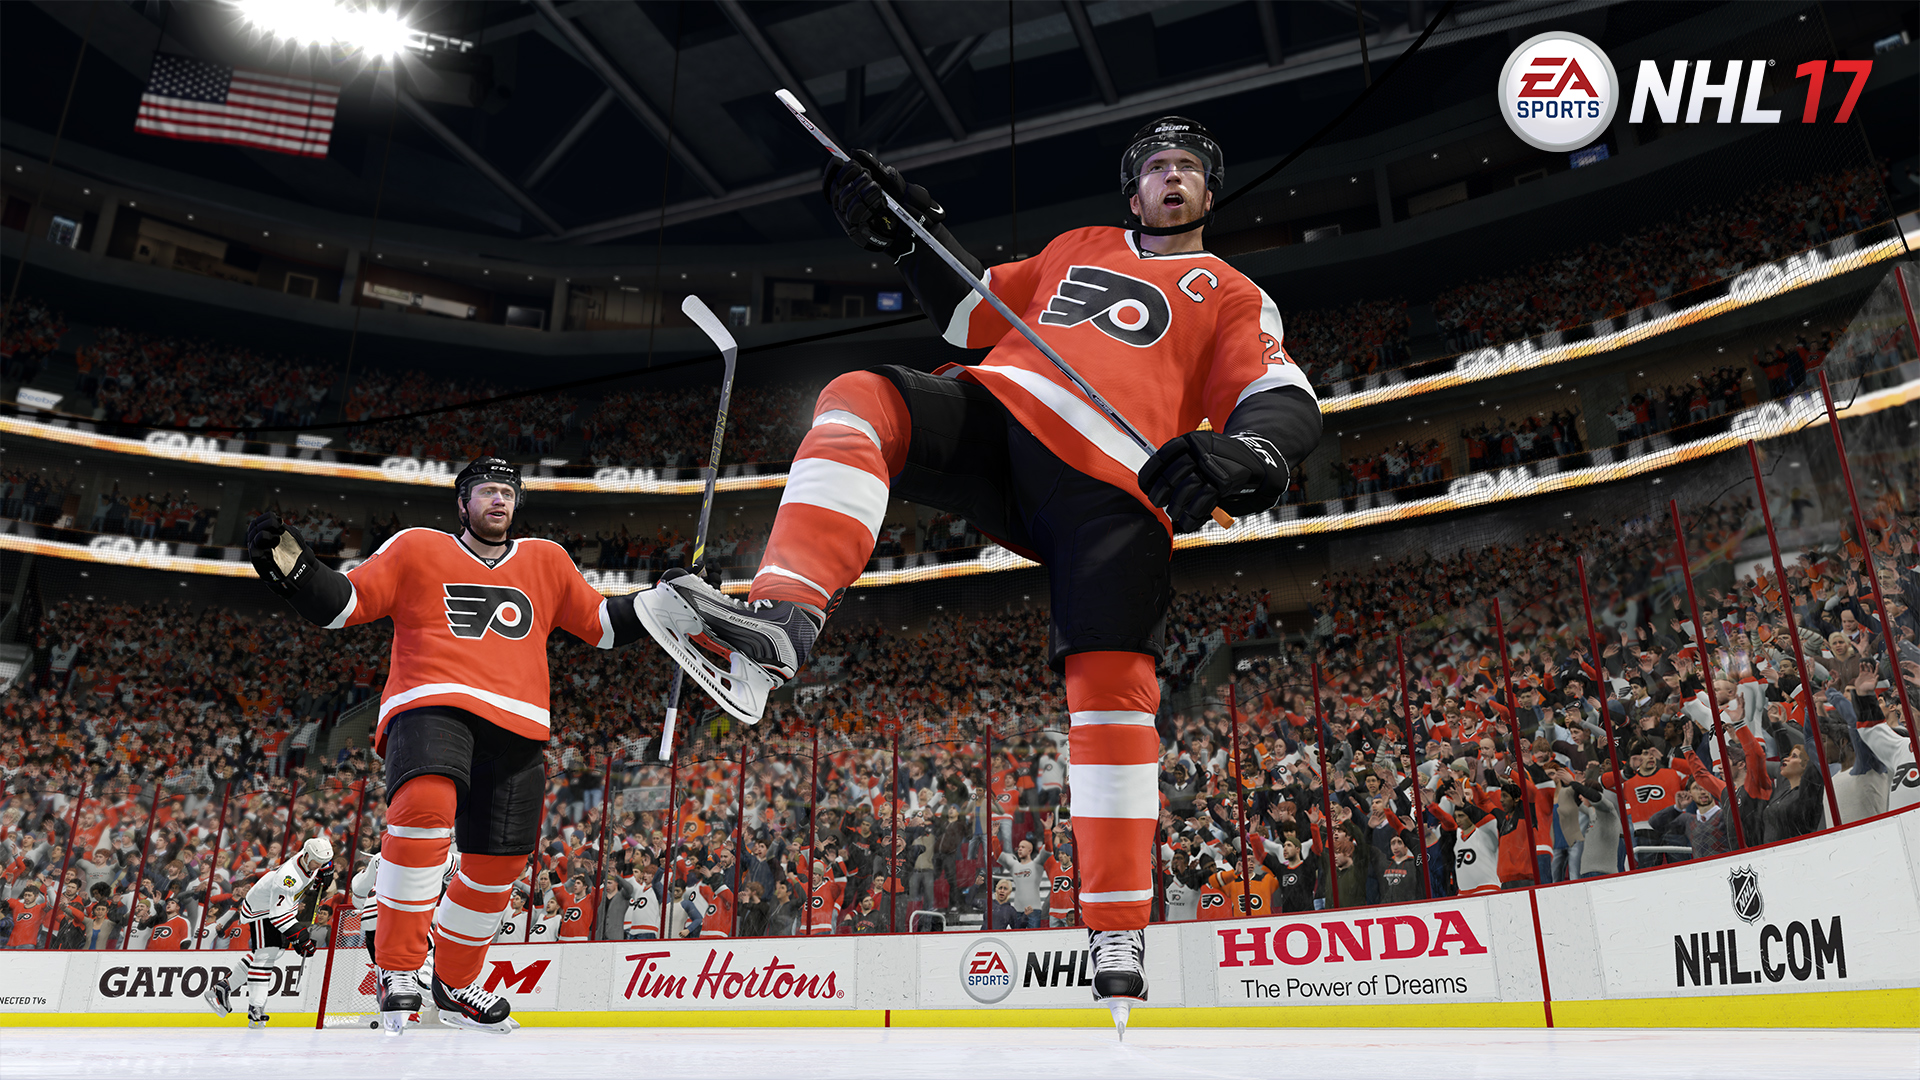 NHL 17 Gives Look At League's Future